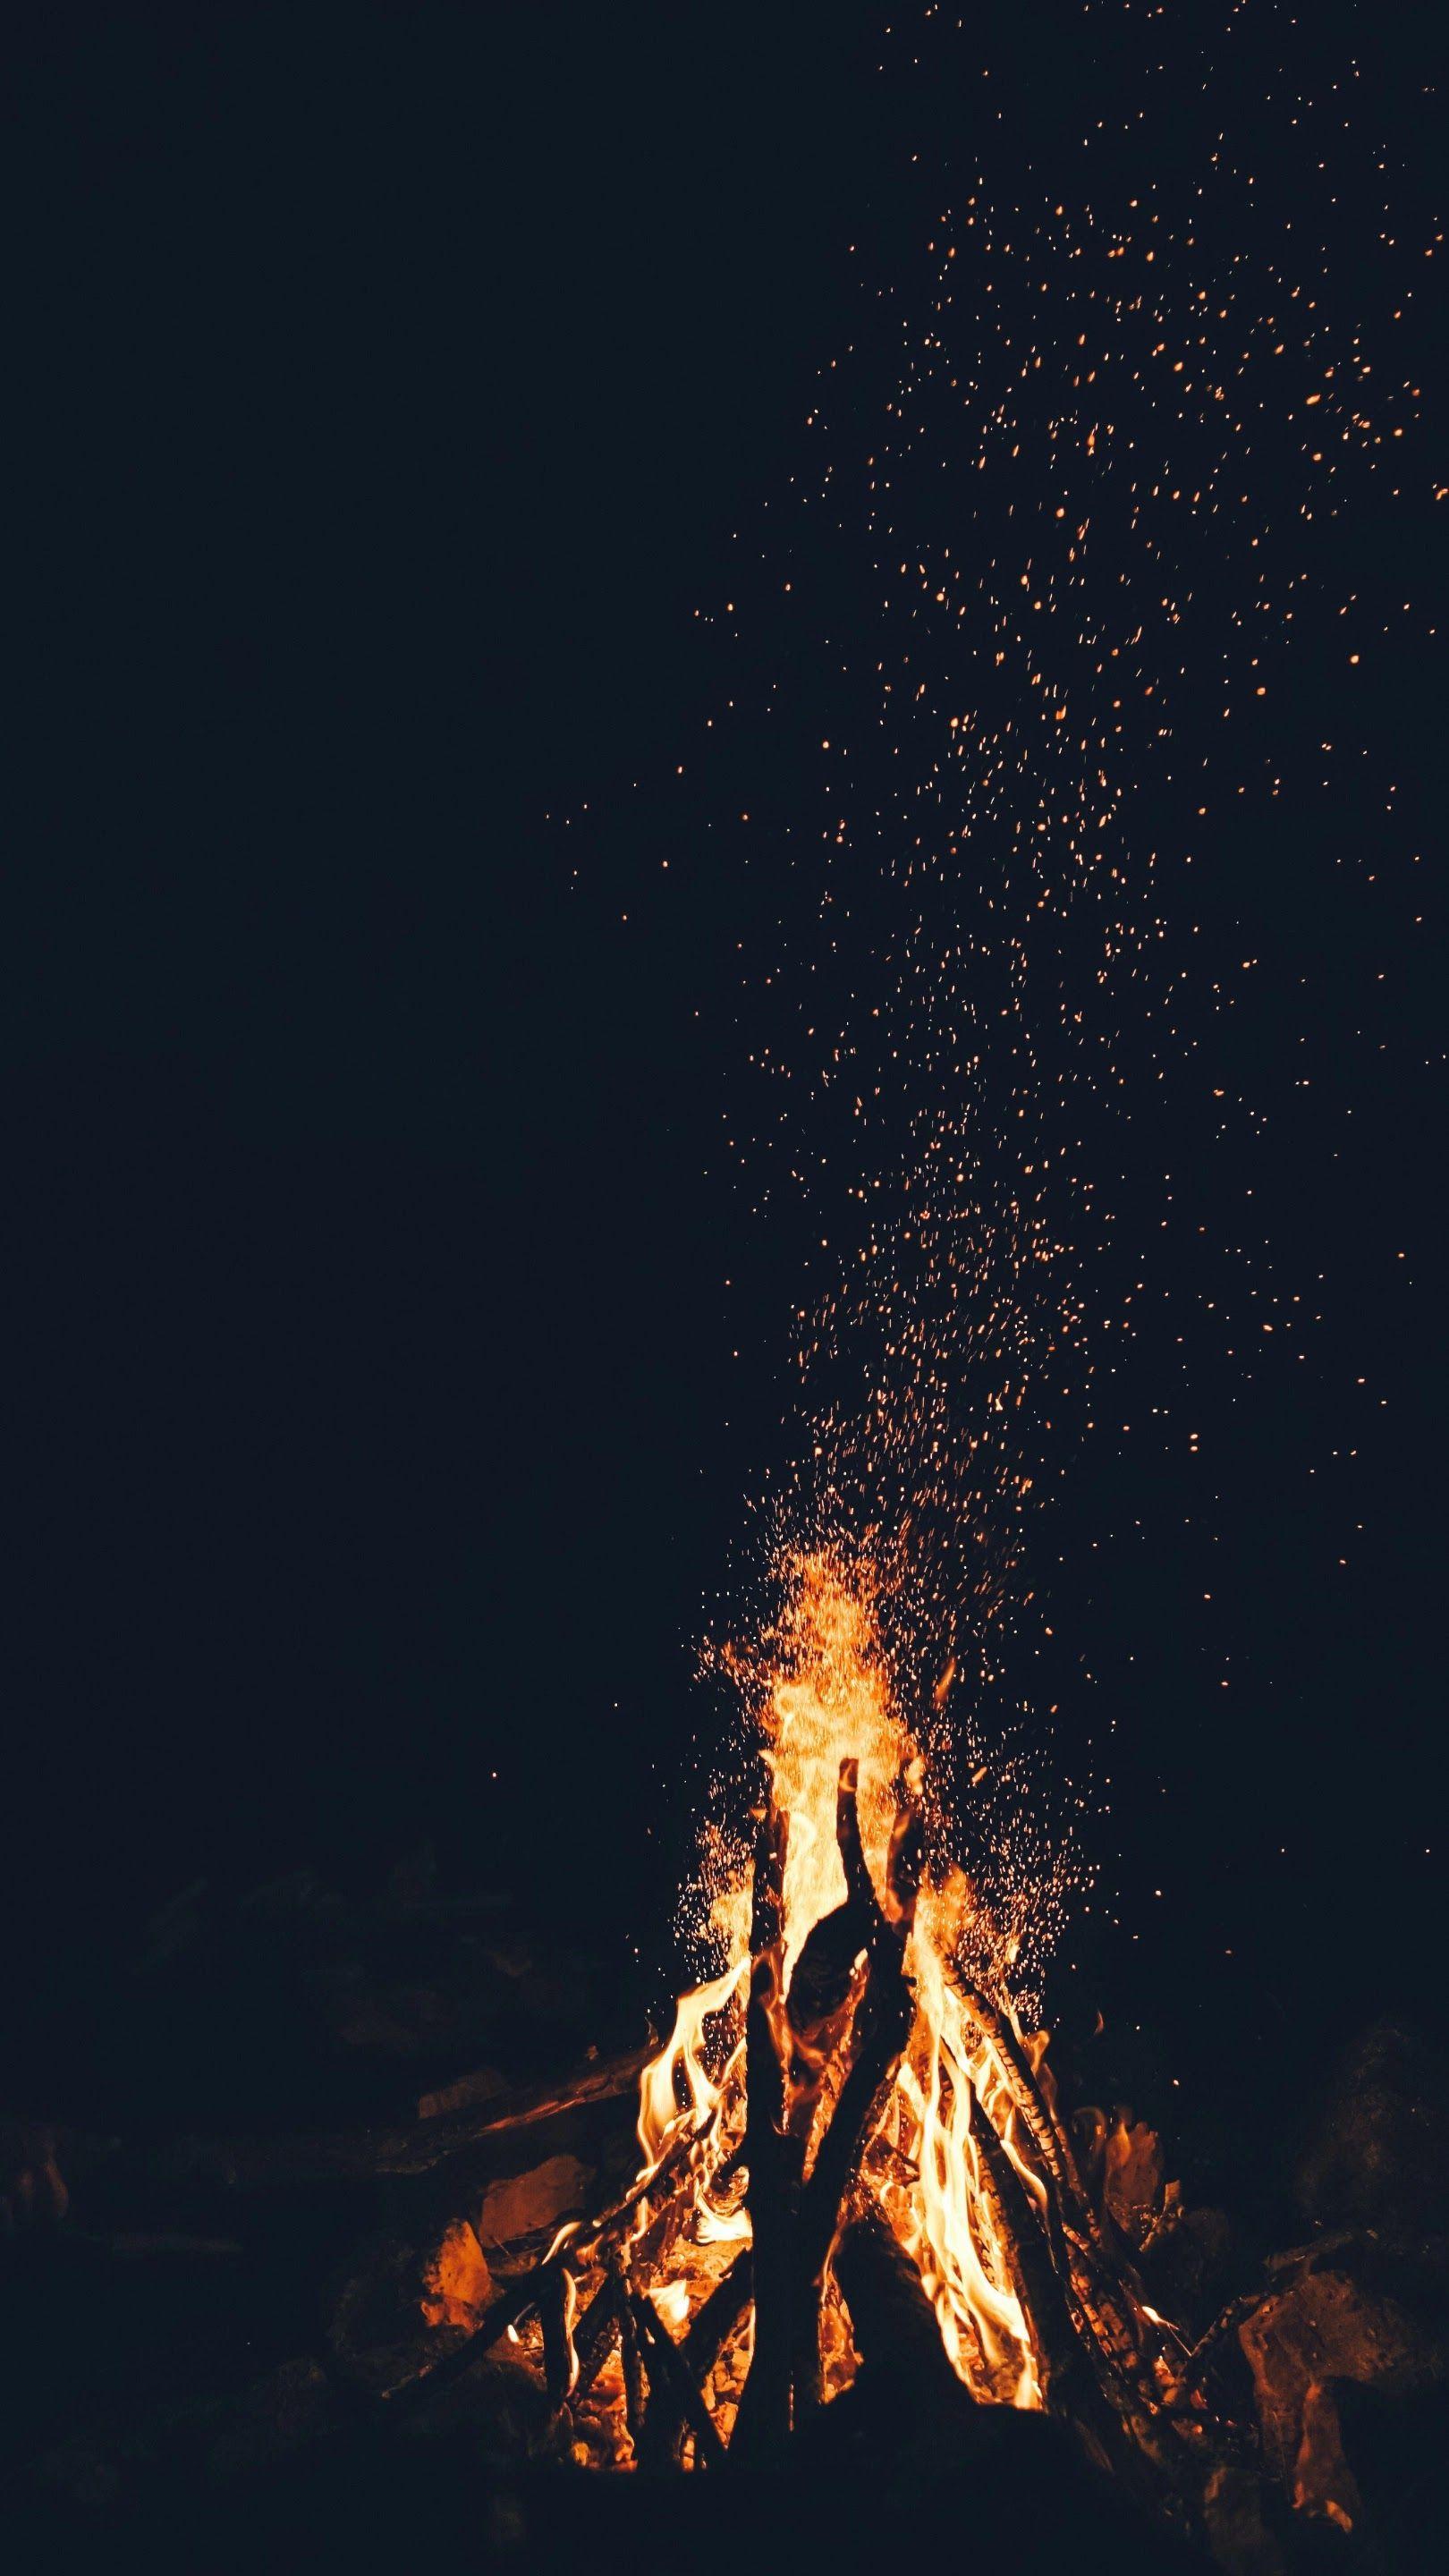 Night camp fire iphone wallpaper for anyone who is into camping